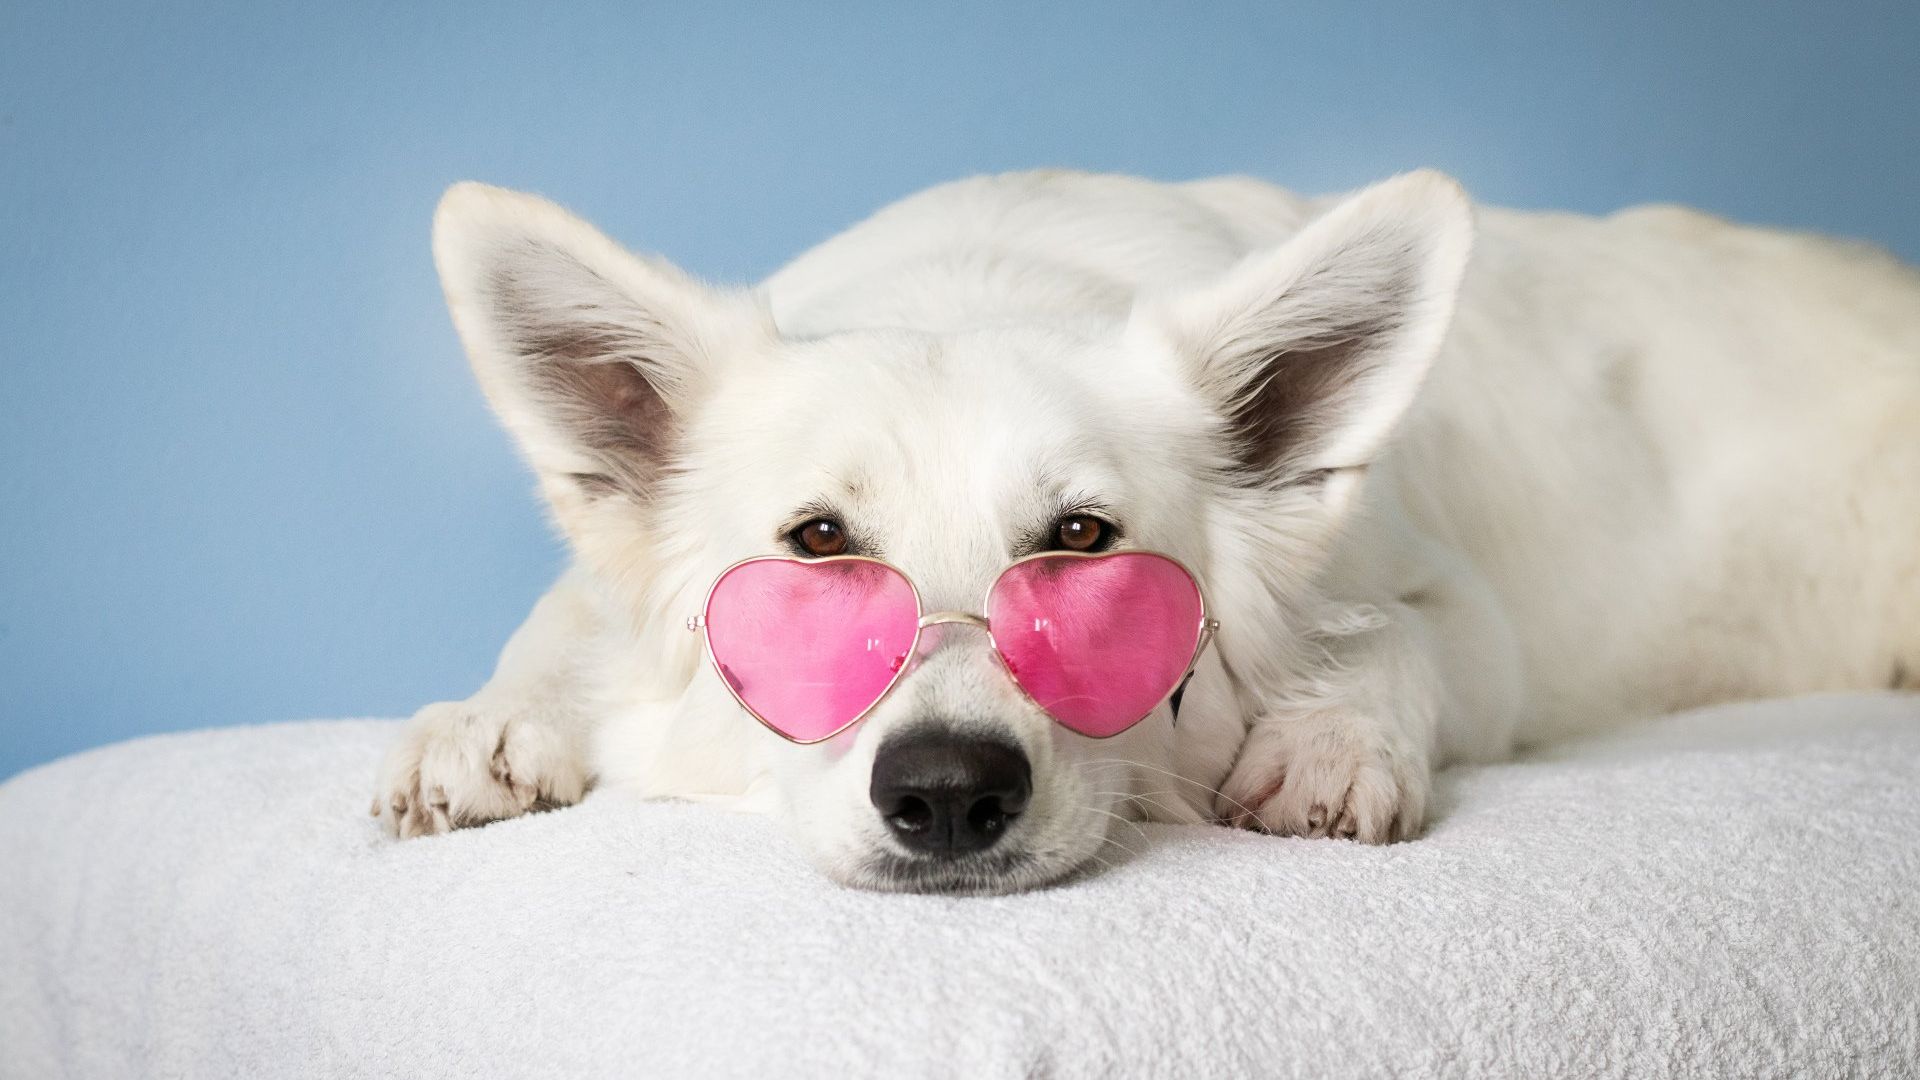 White dog with a heart pink shaped eye glasses